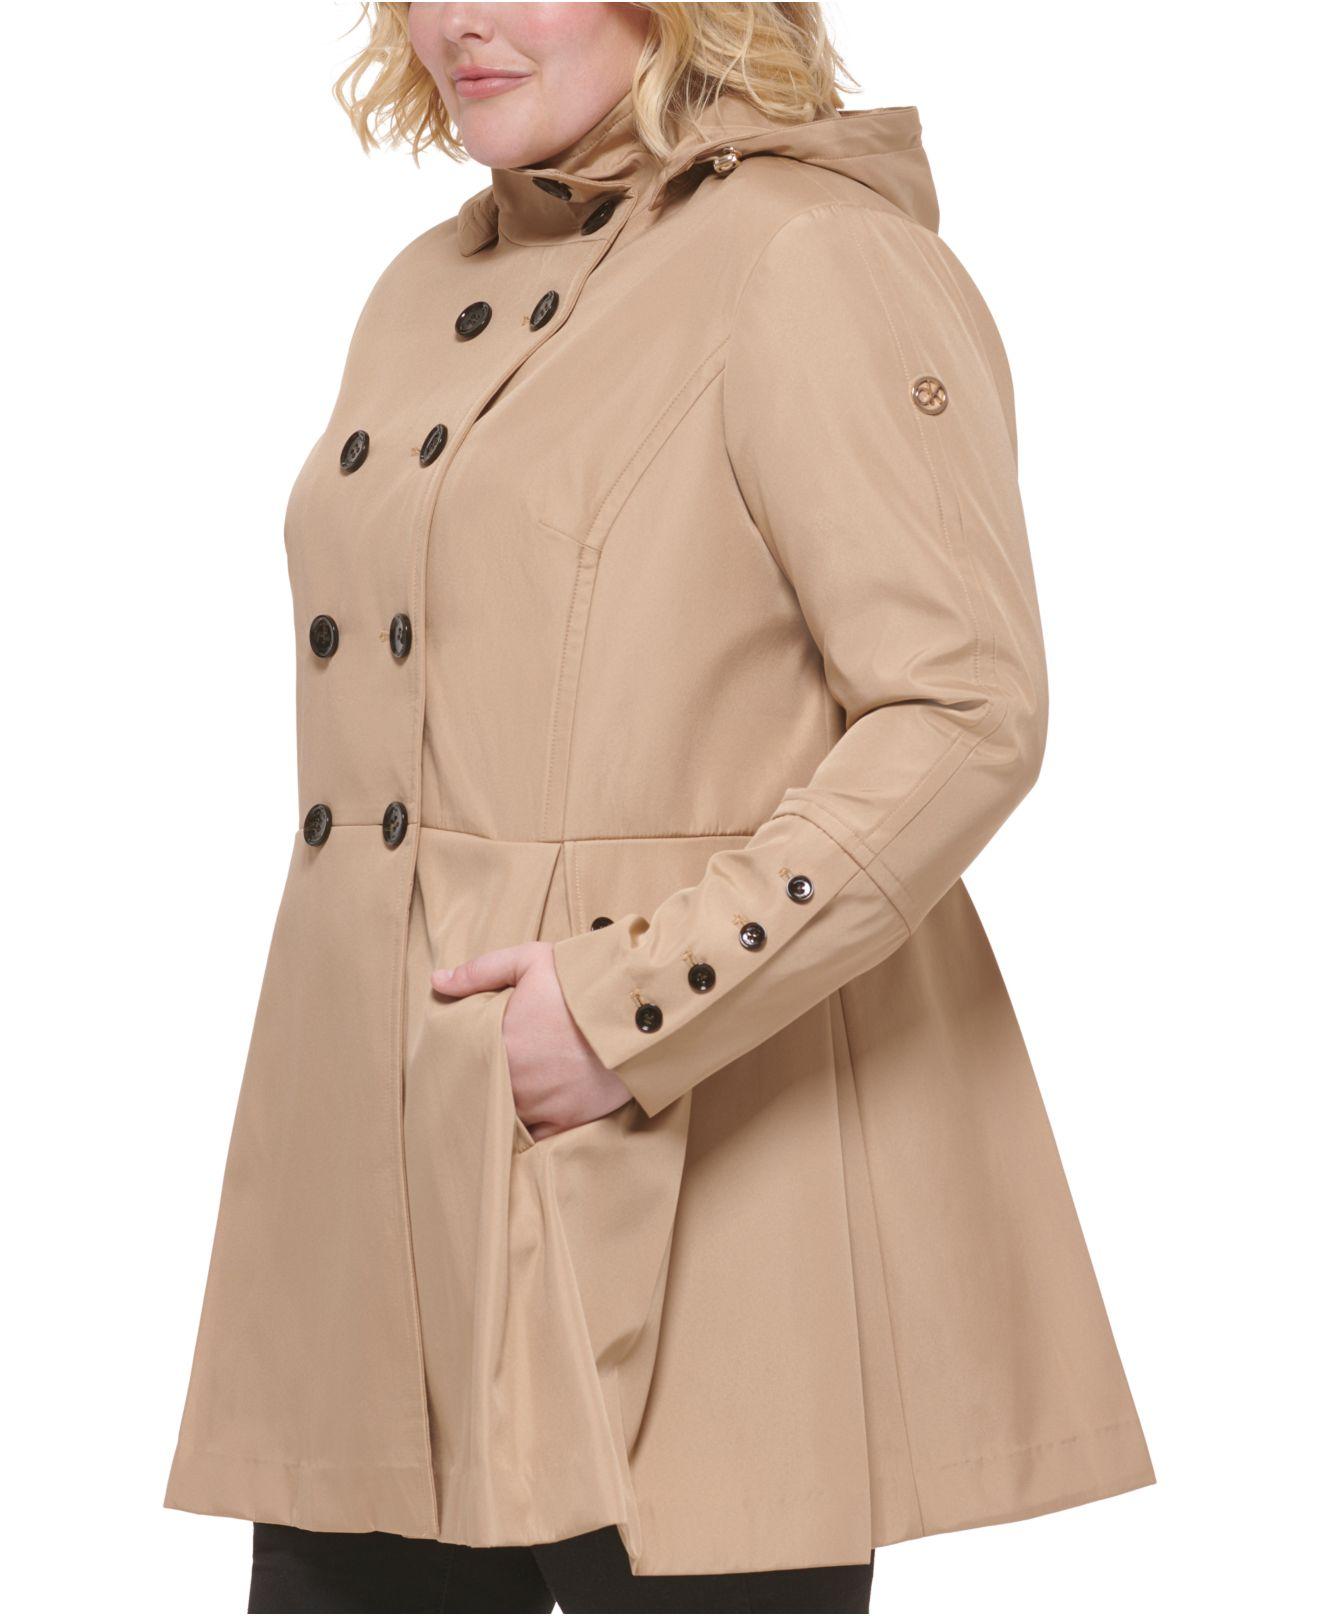 Calvin Klein Plus Size Hooded Skirted Raincoat in Natural | Lyst